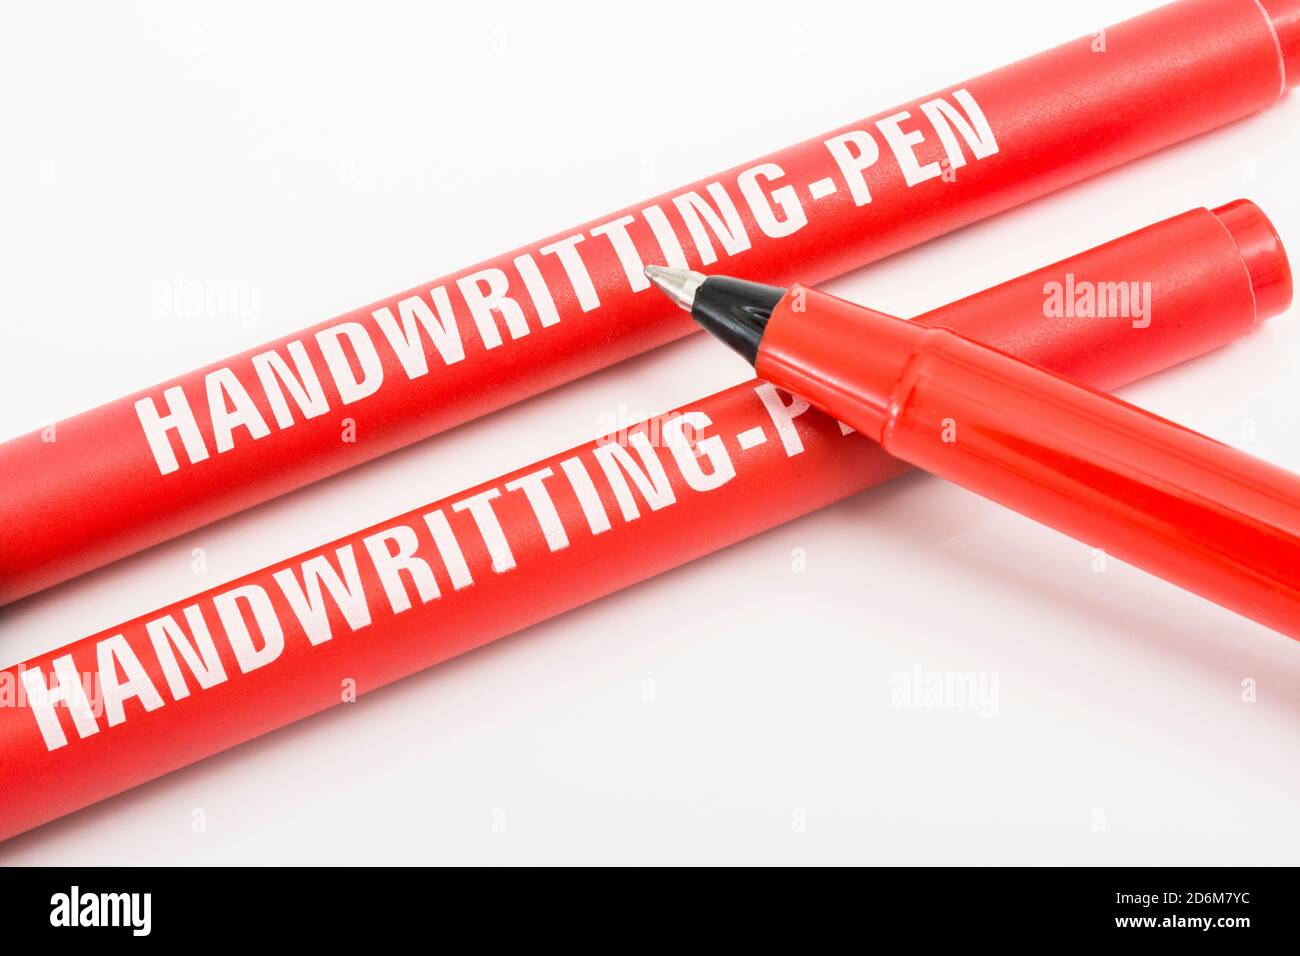 https://c8.alamy.com/comp/2D6M7YC/own-brand-poundland-roller-pens-with-word-handwriting-misspelled-on-an-off-white-bg-for-typo-misprint-poor-spelling-bad-english-writing-error-2D6M7YC.jpg